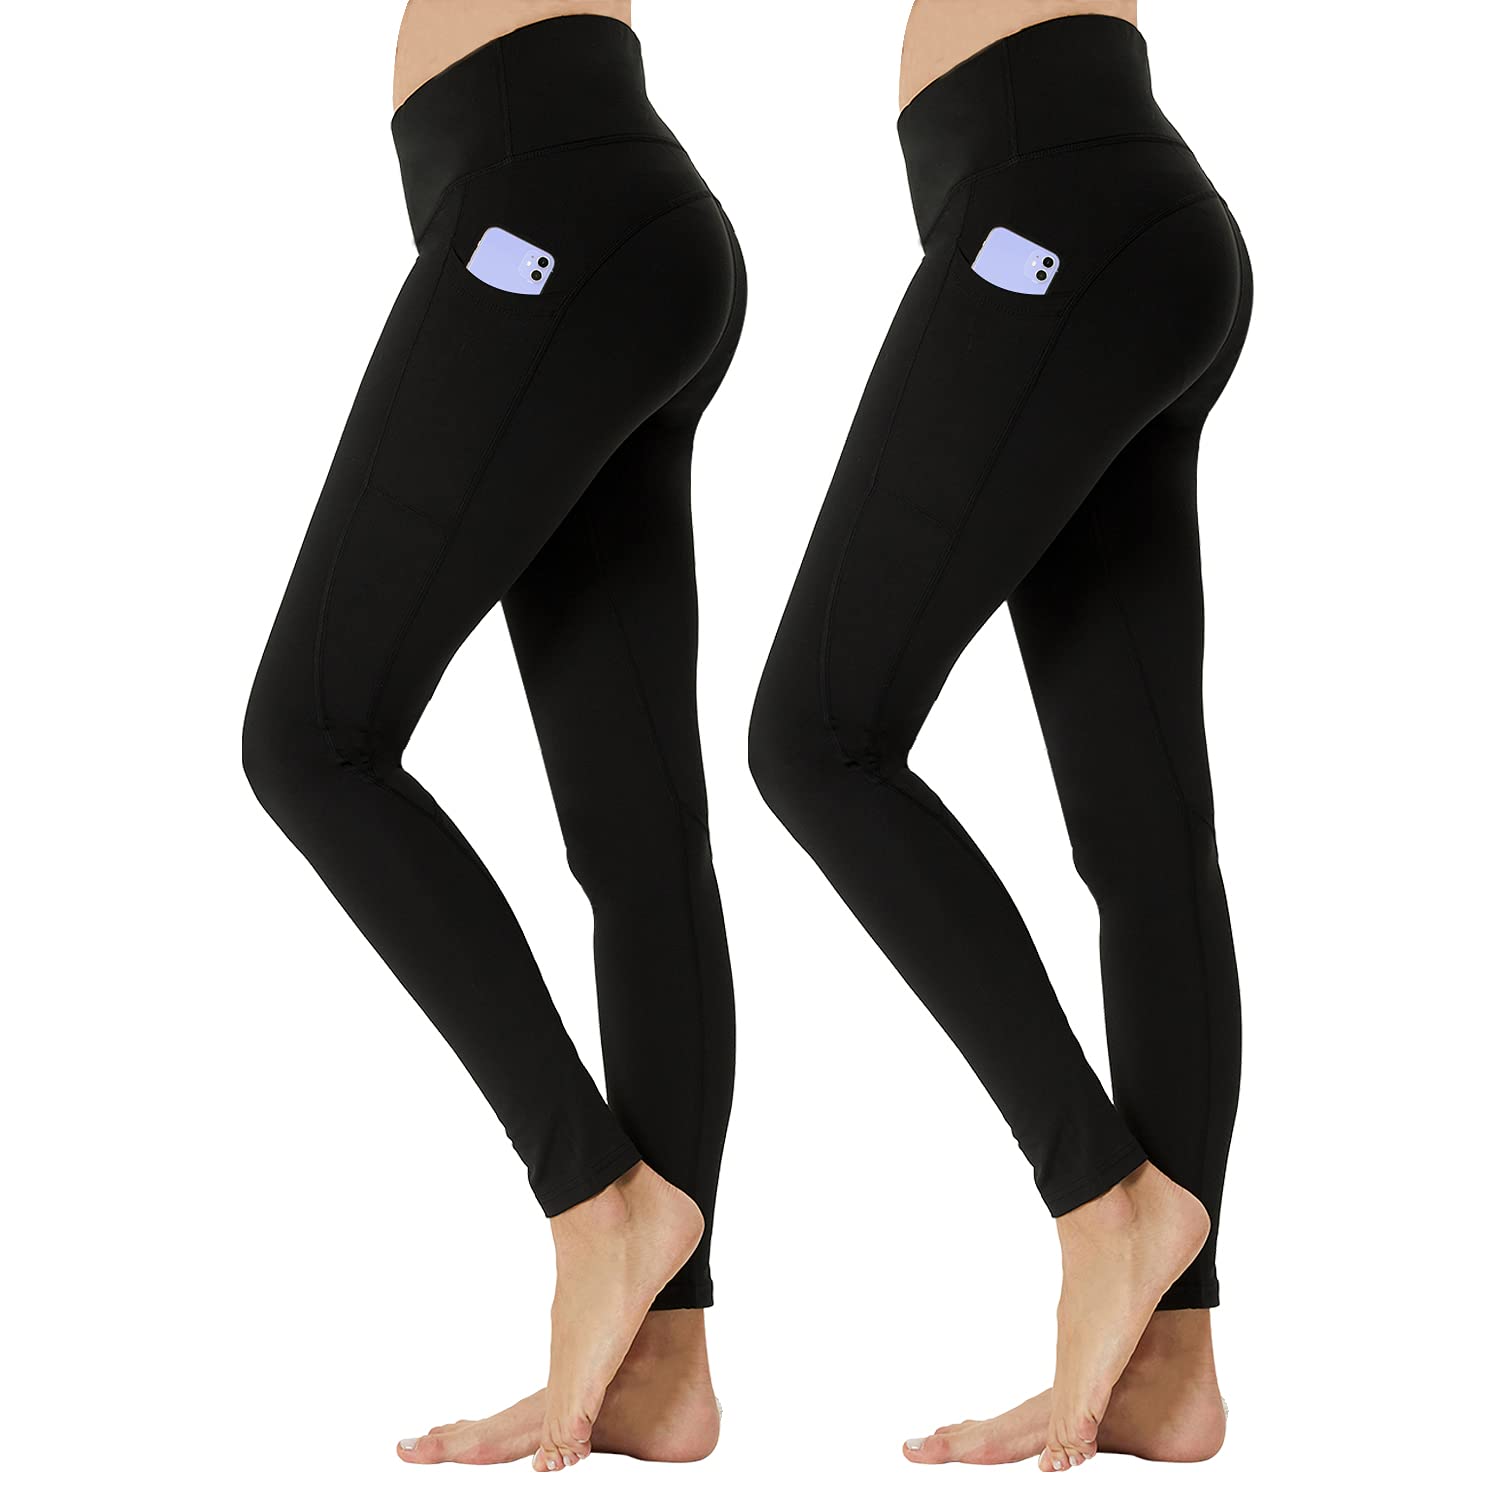  4 Pack Leggings For Women High Waisted Butt Lift Tummy  Control No See-Through Yoga Pants Workout Running Leggings Small-Medium